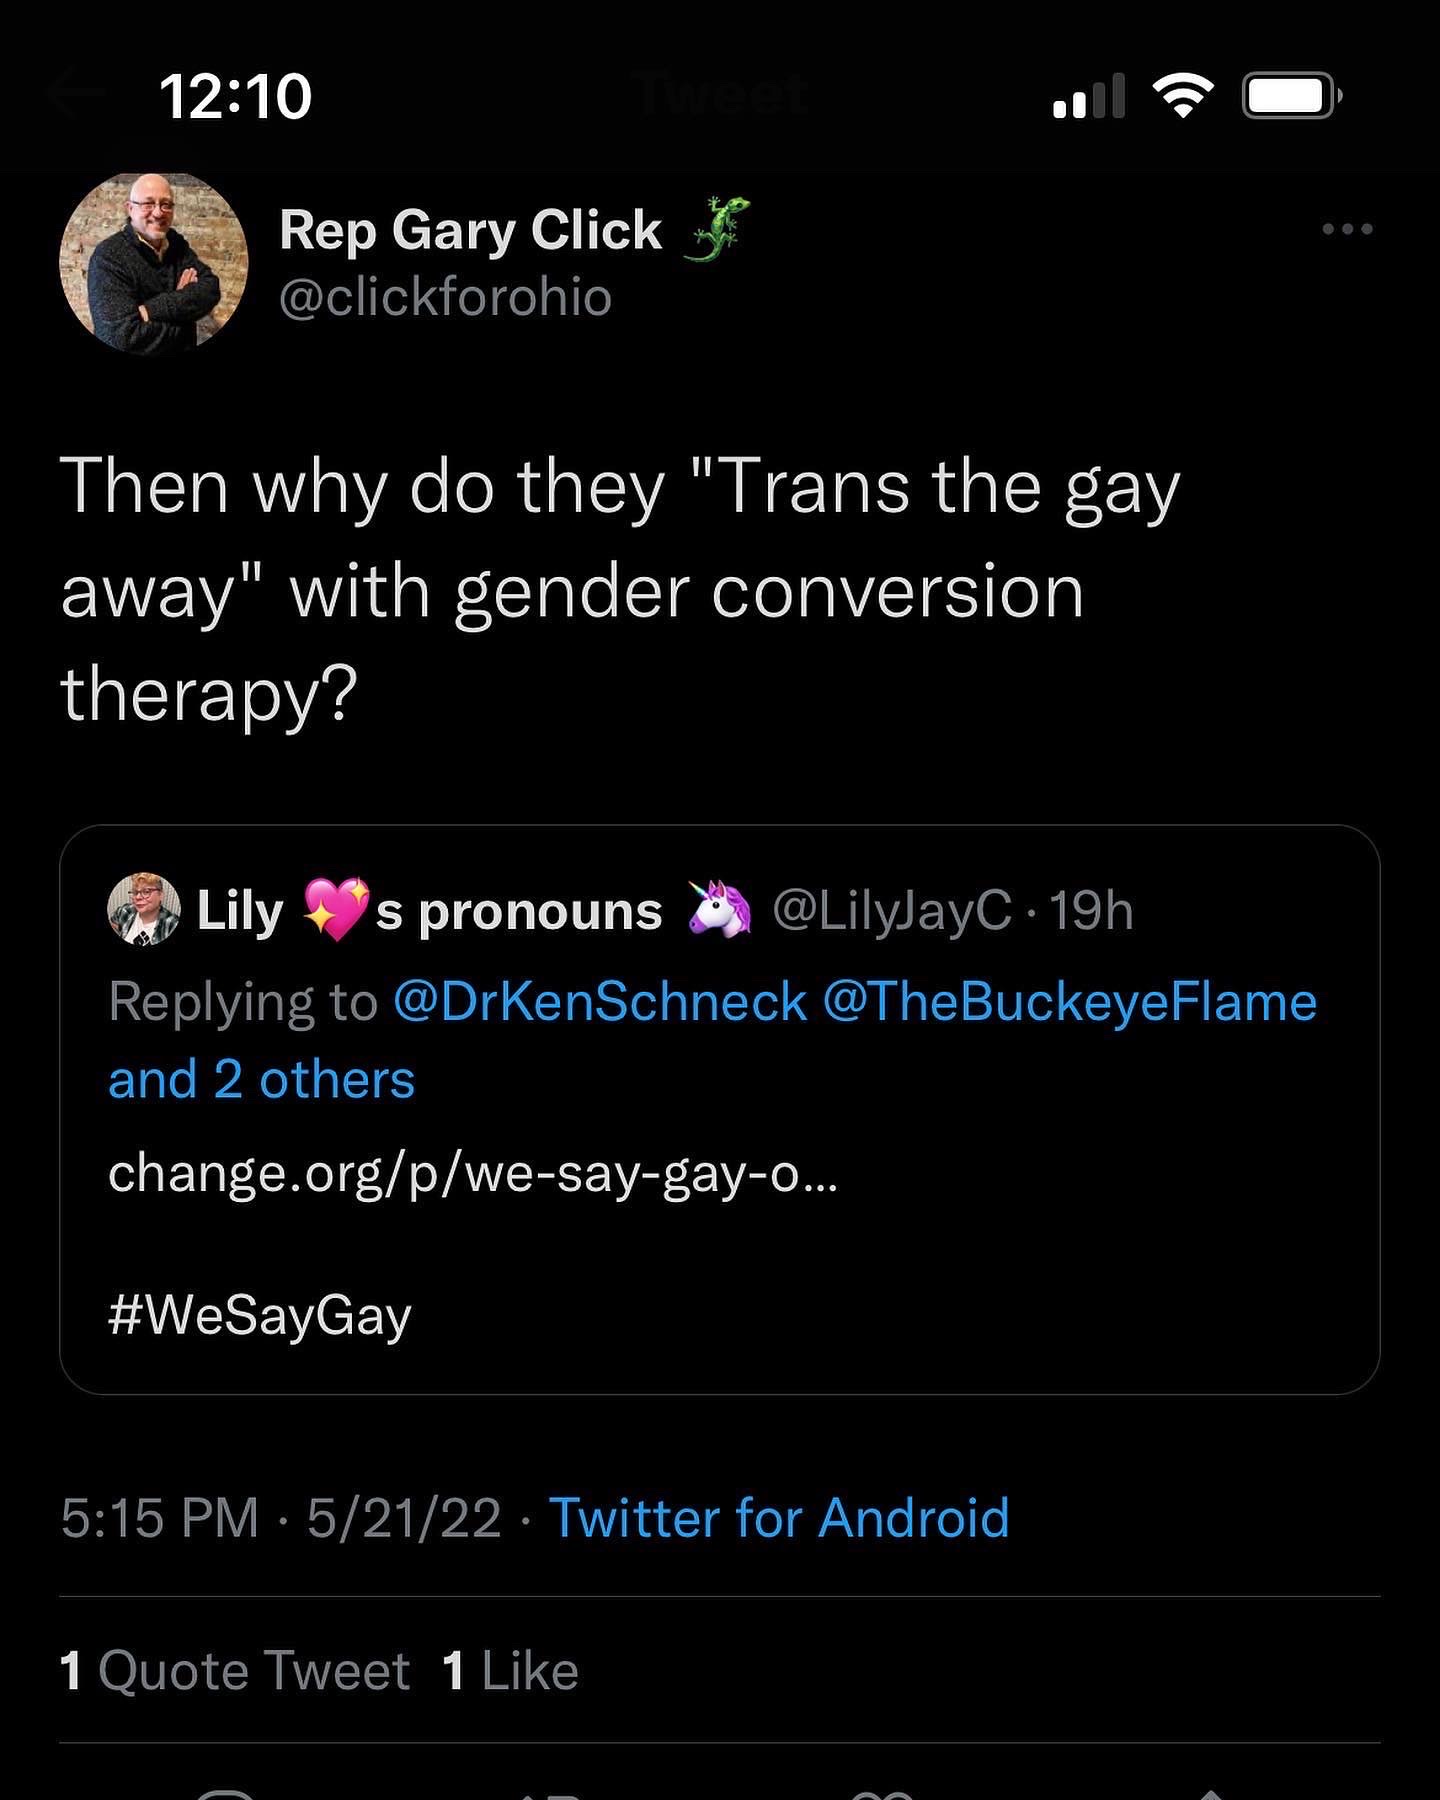 Image is a screenshot. 5/21/22 5:15 pm. @garyclick quote tweets me, @LilyJayC and says: then why do they quote trans the gay away unquote with conversion therapy? He is quote tweeting myself, as well as @DrKenSchneck, @TheBuckeyeFlame and two others